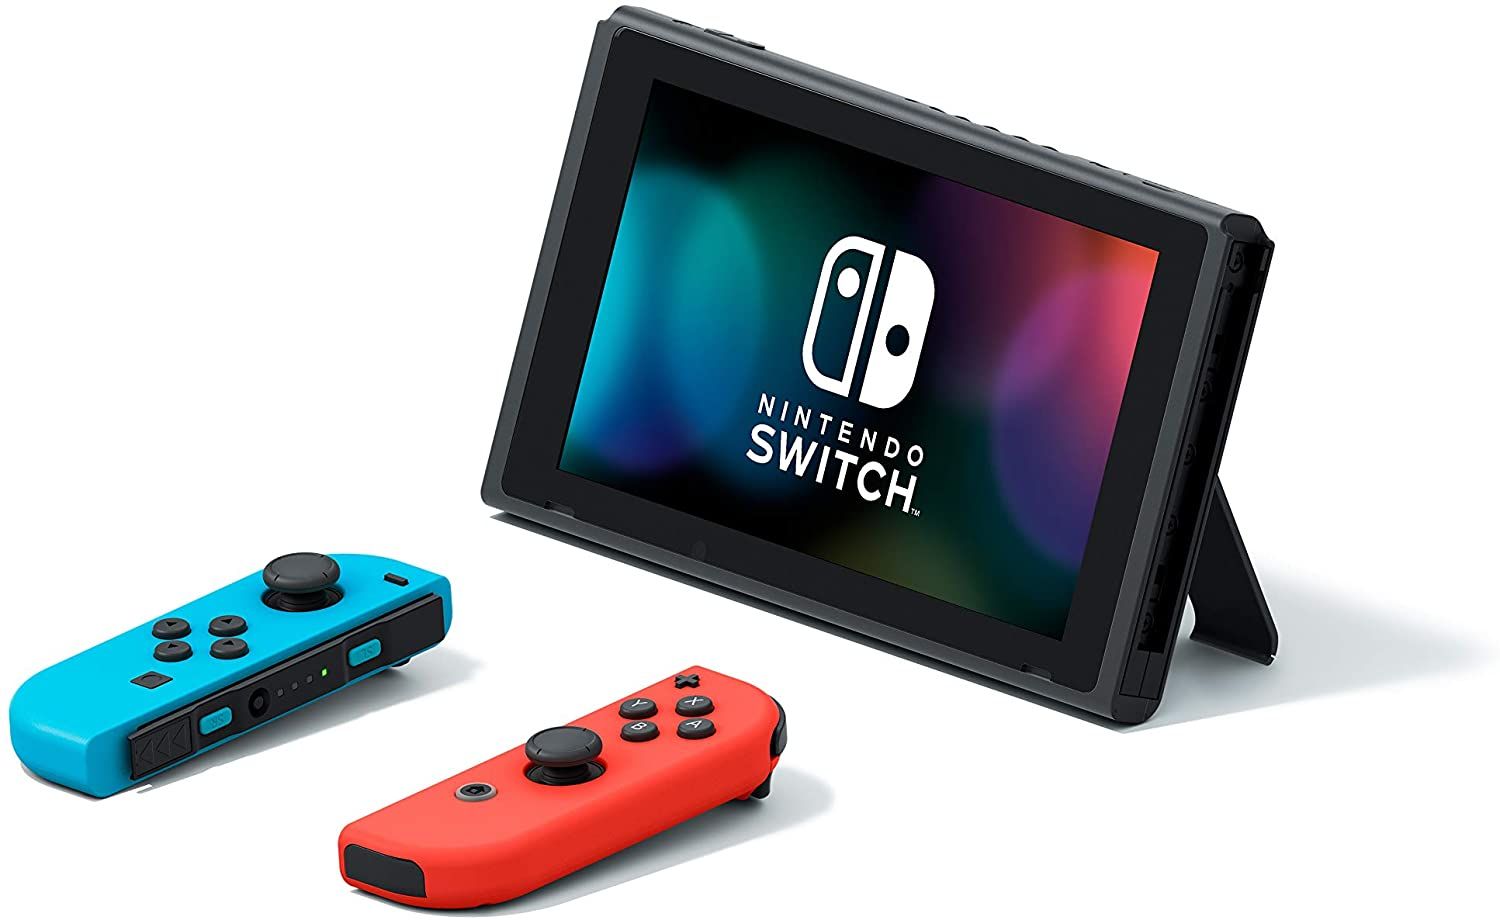 Nintendo Switch with kickstand extended, next to controllers